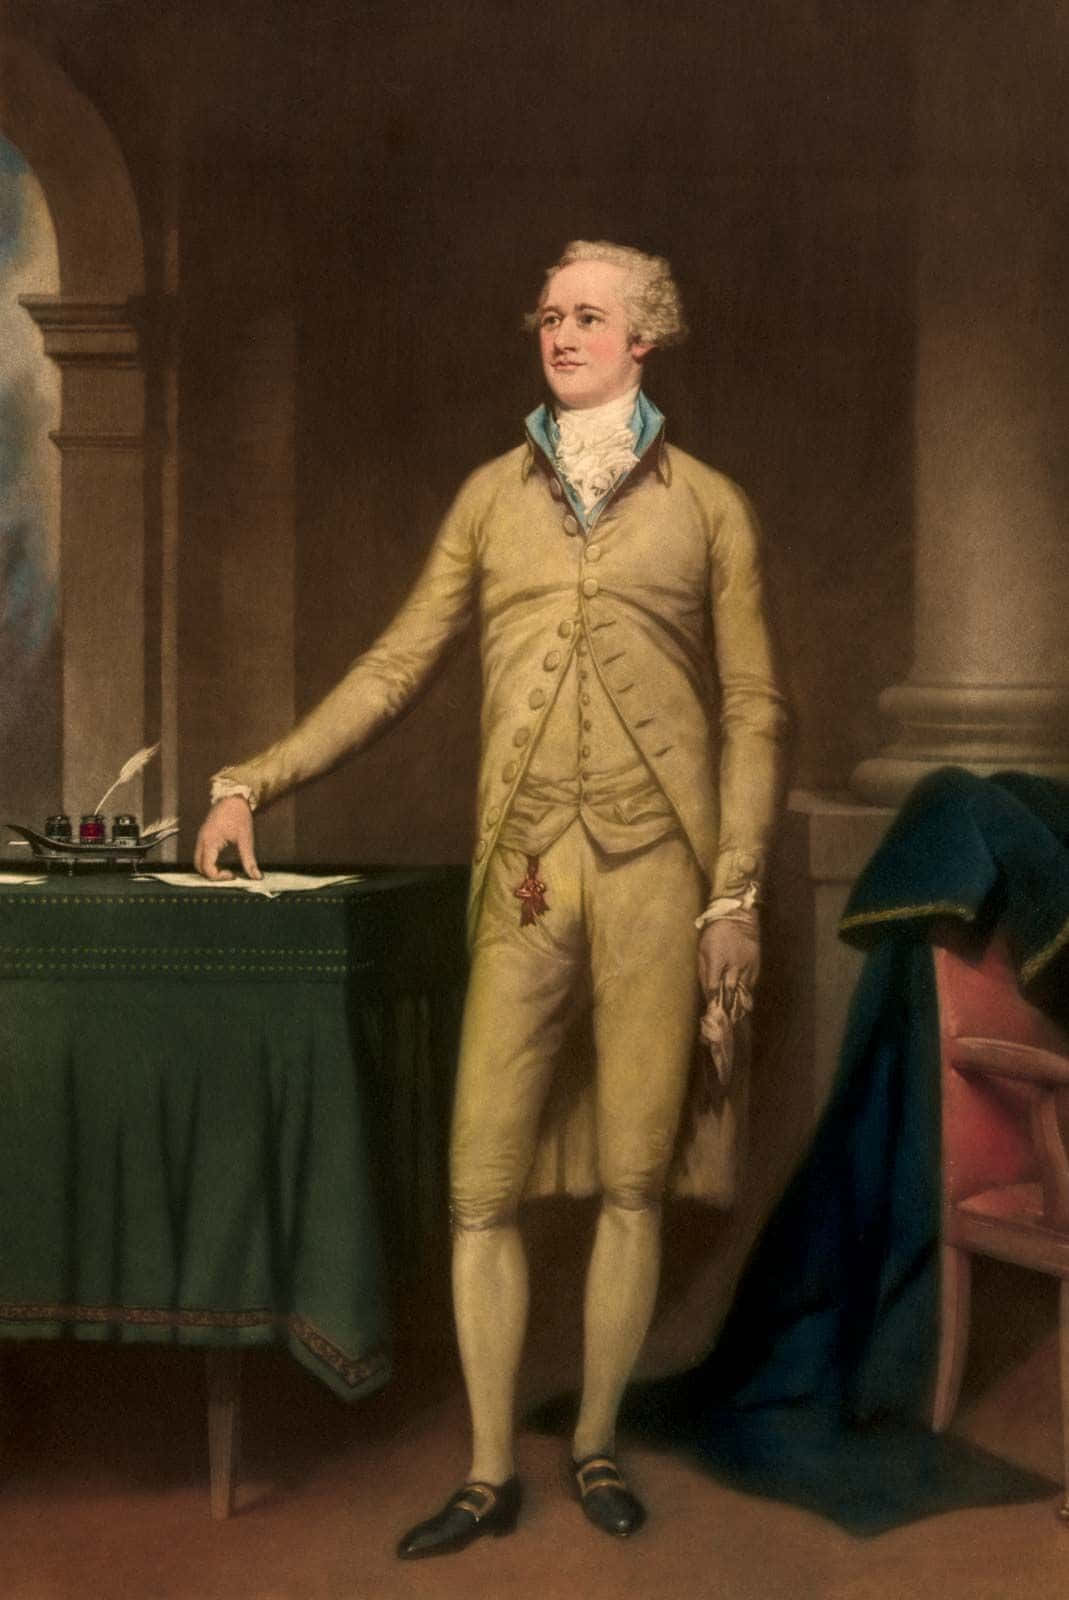 A Painting Of A Man In A Yellow Suit Standing In Front Of A Table